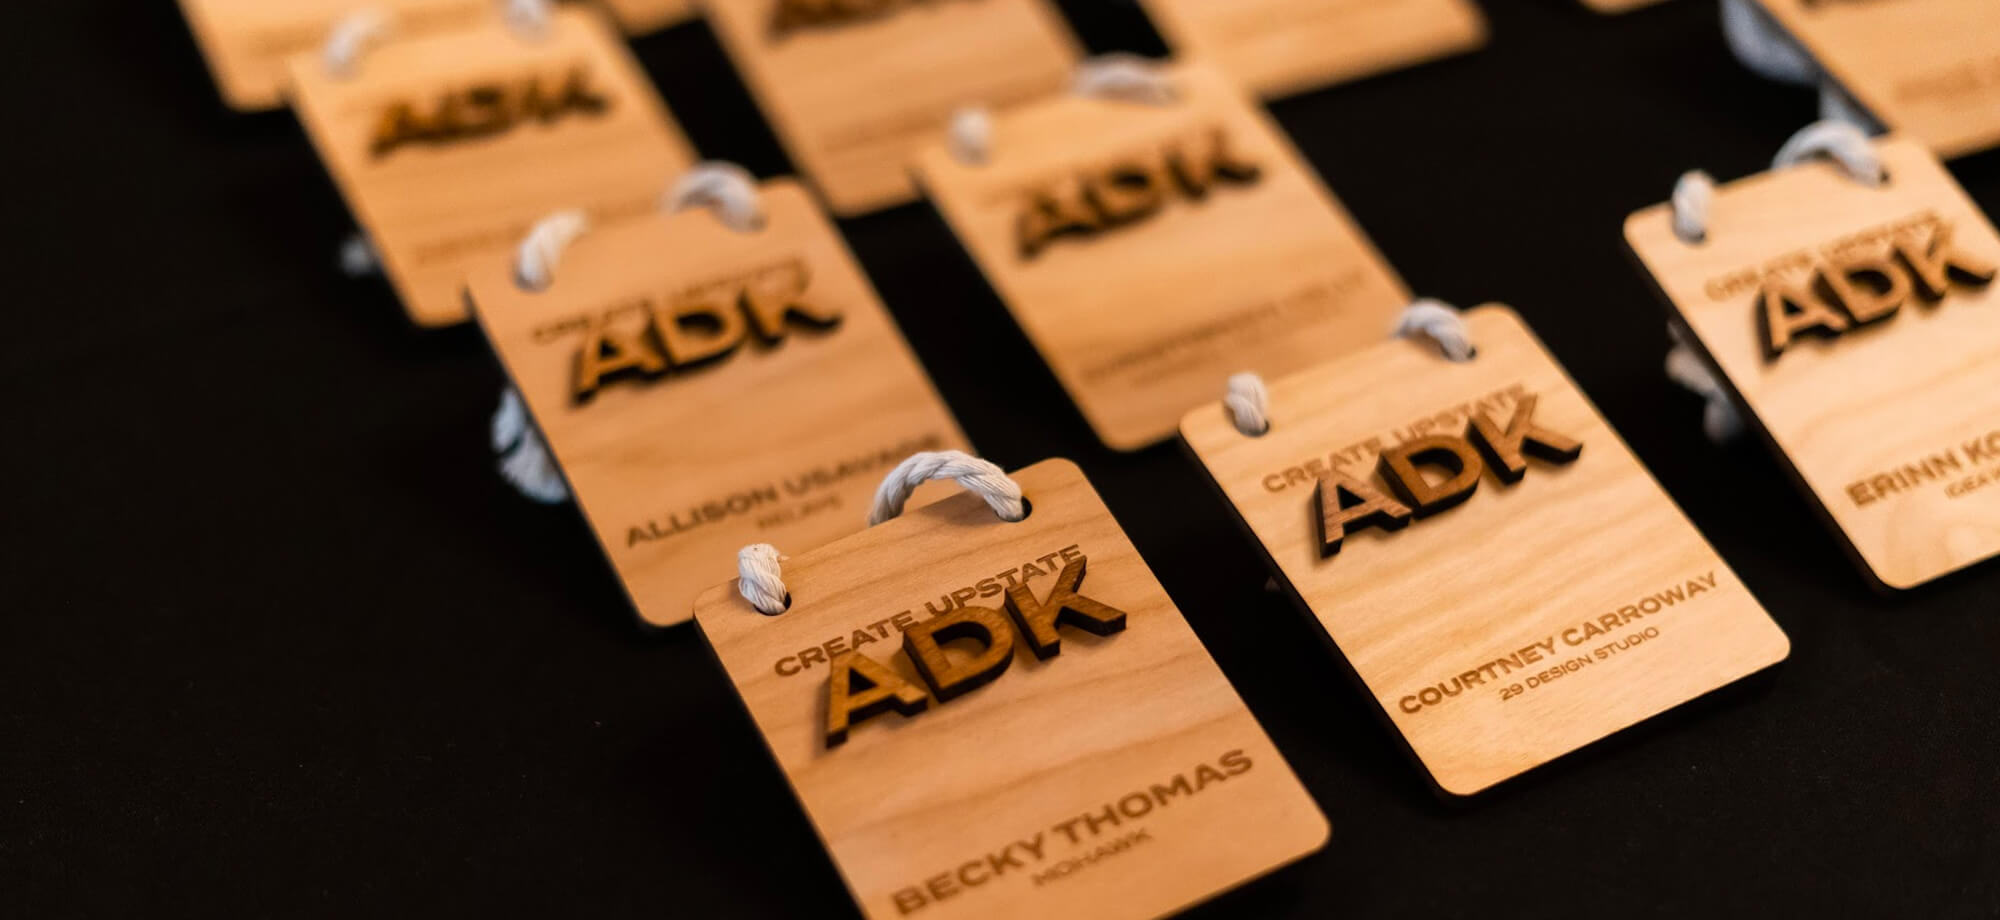 ADK nametags on table